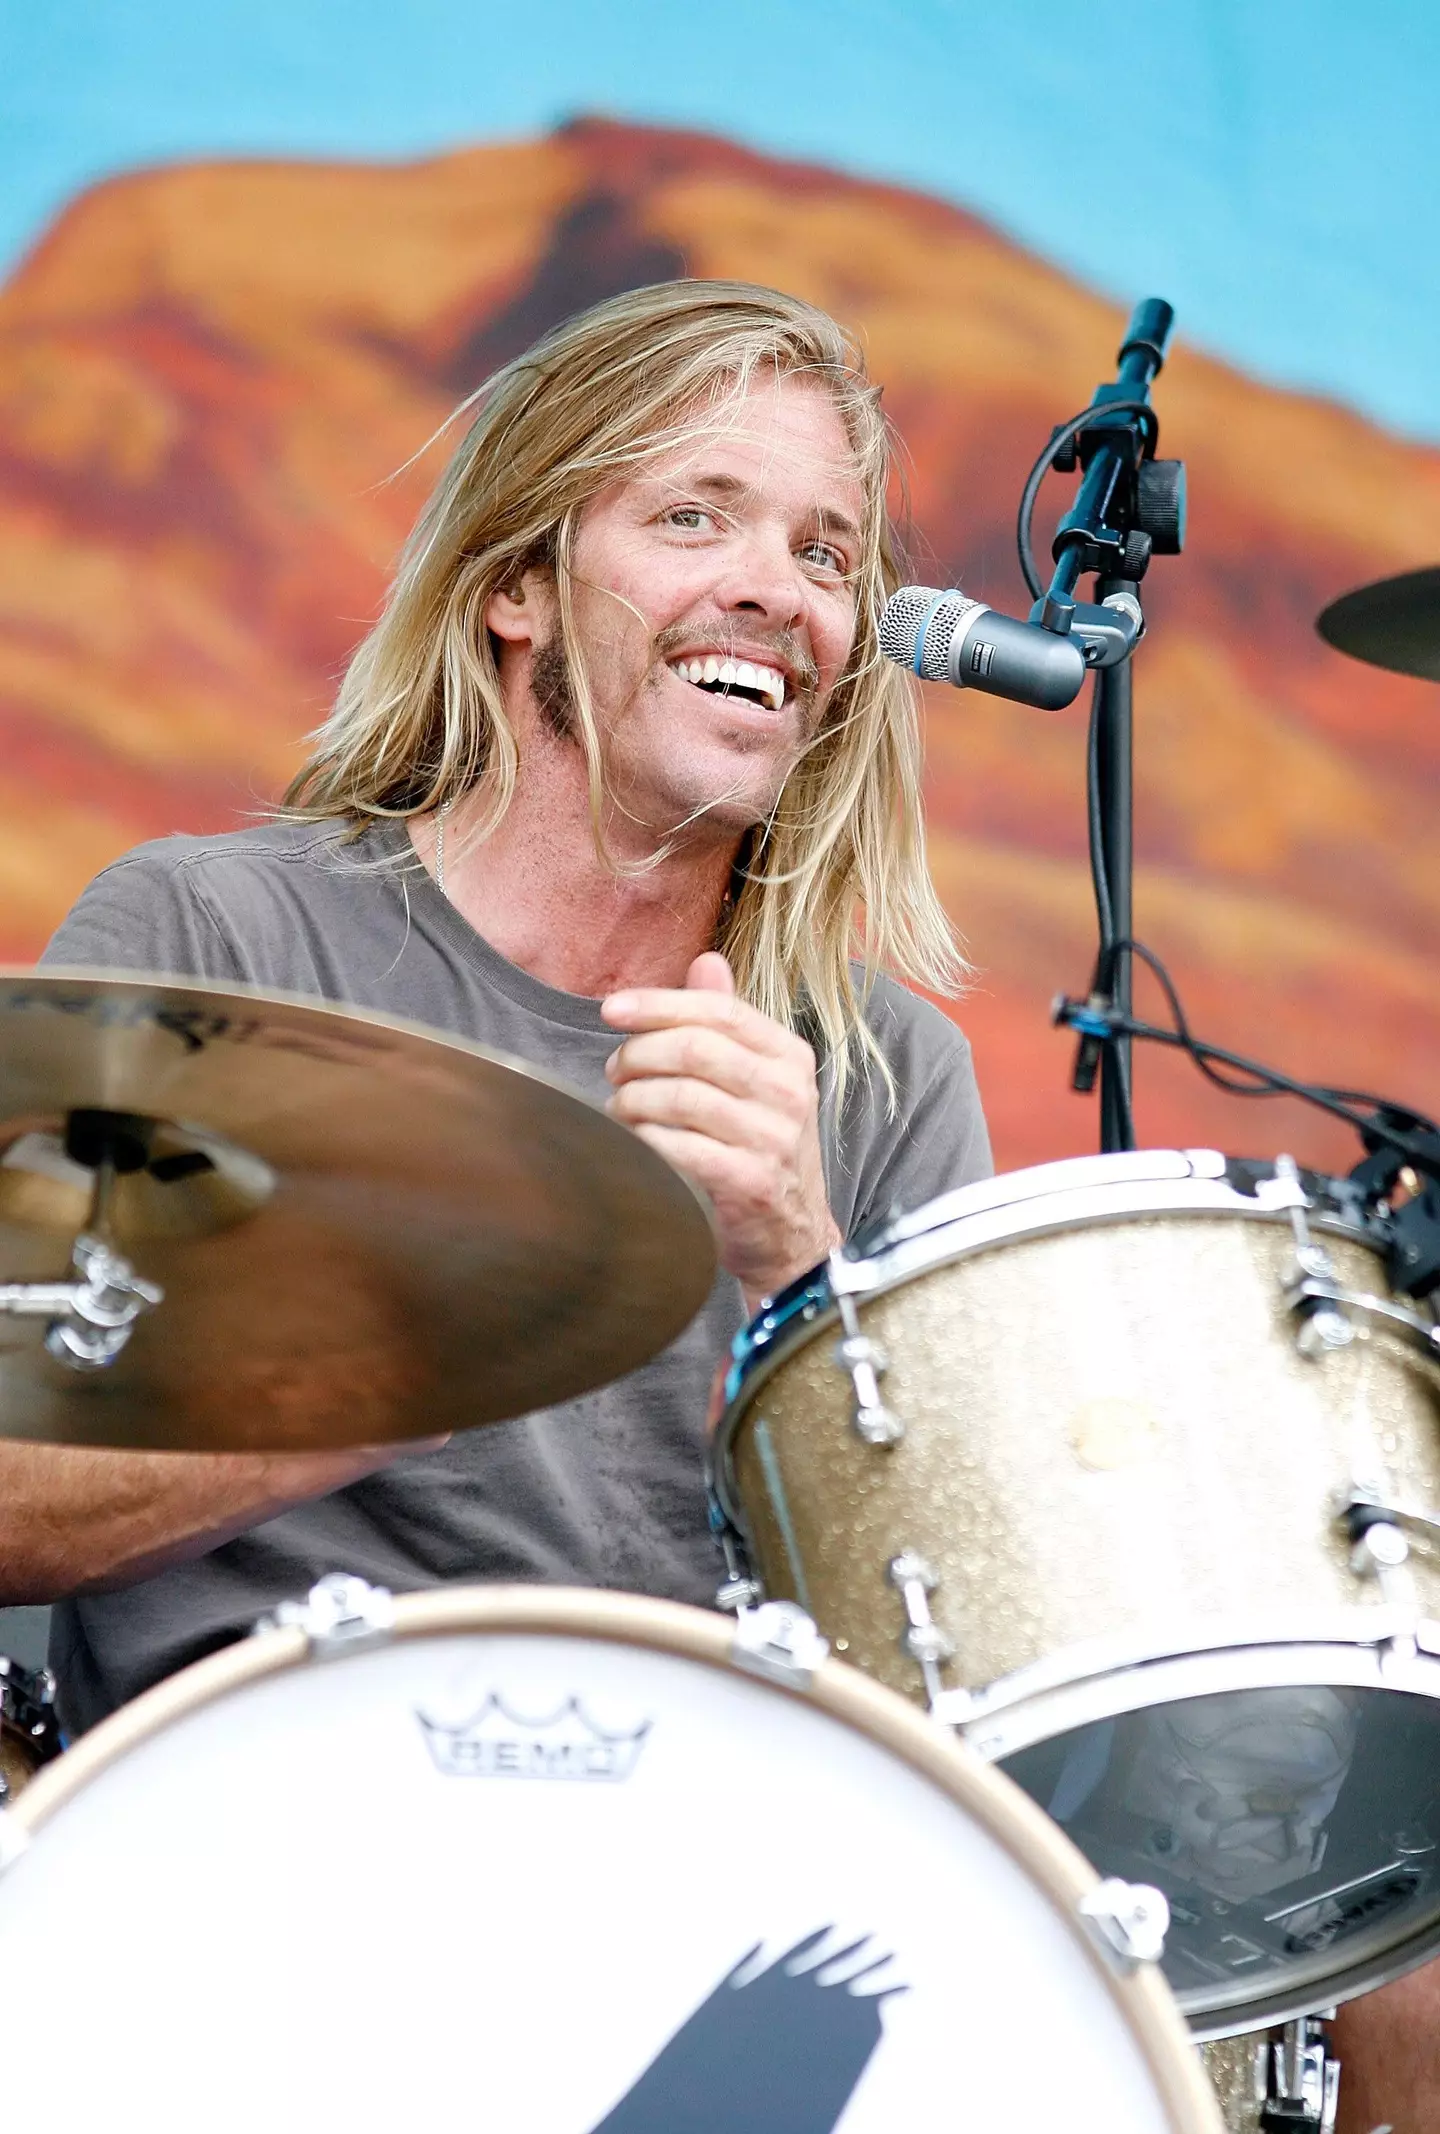 Taylor Hawkins was one of the most celebrated drummers of all time.